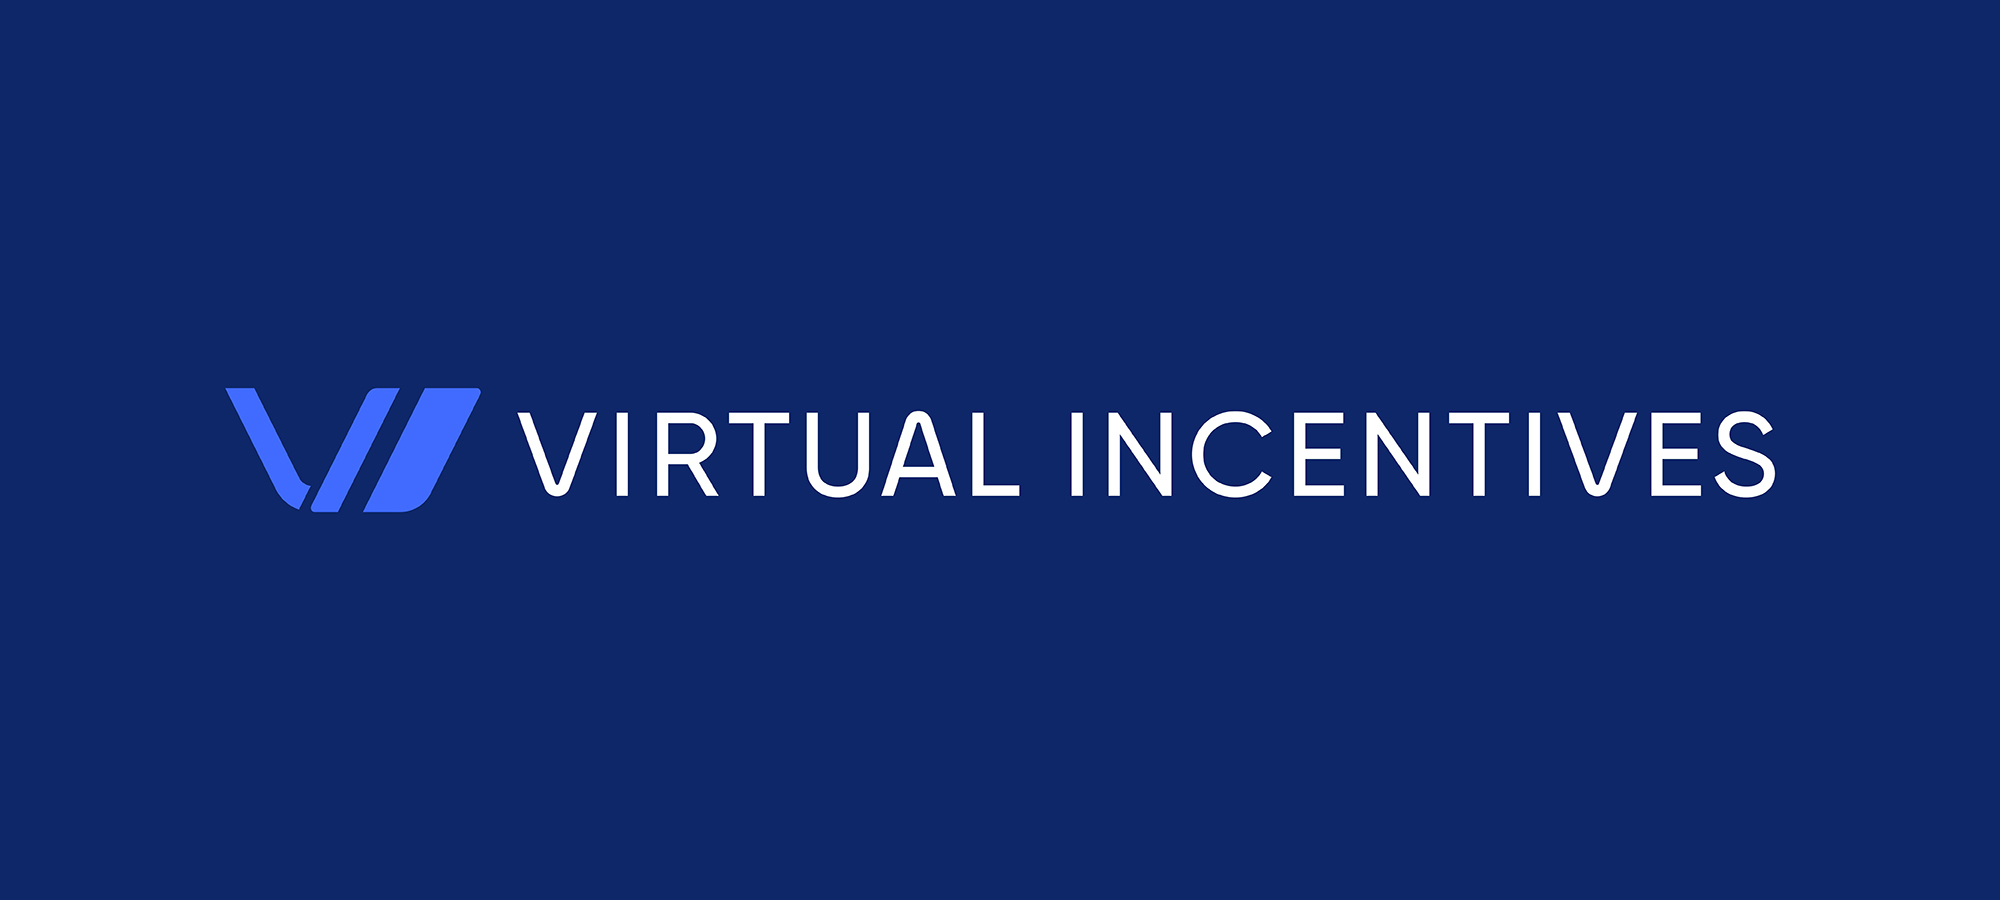 The full Virtual Incentives logo on a navy blue background